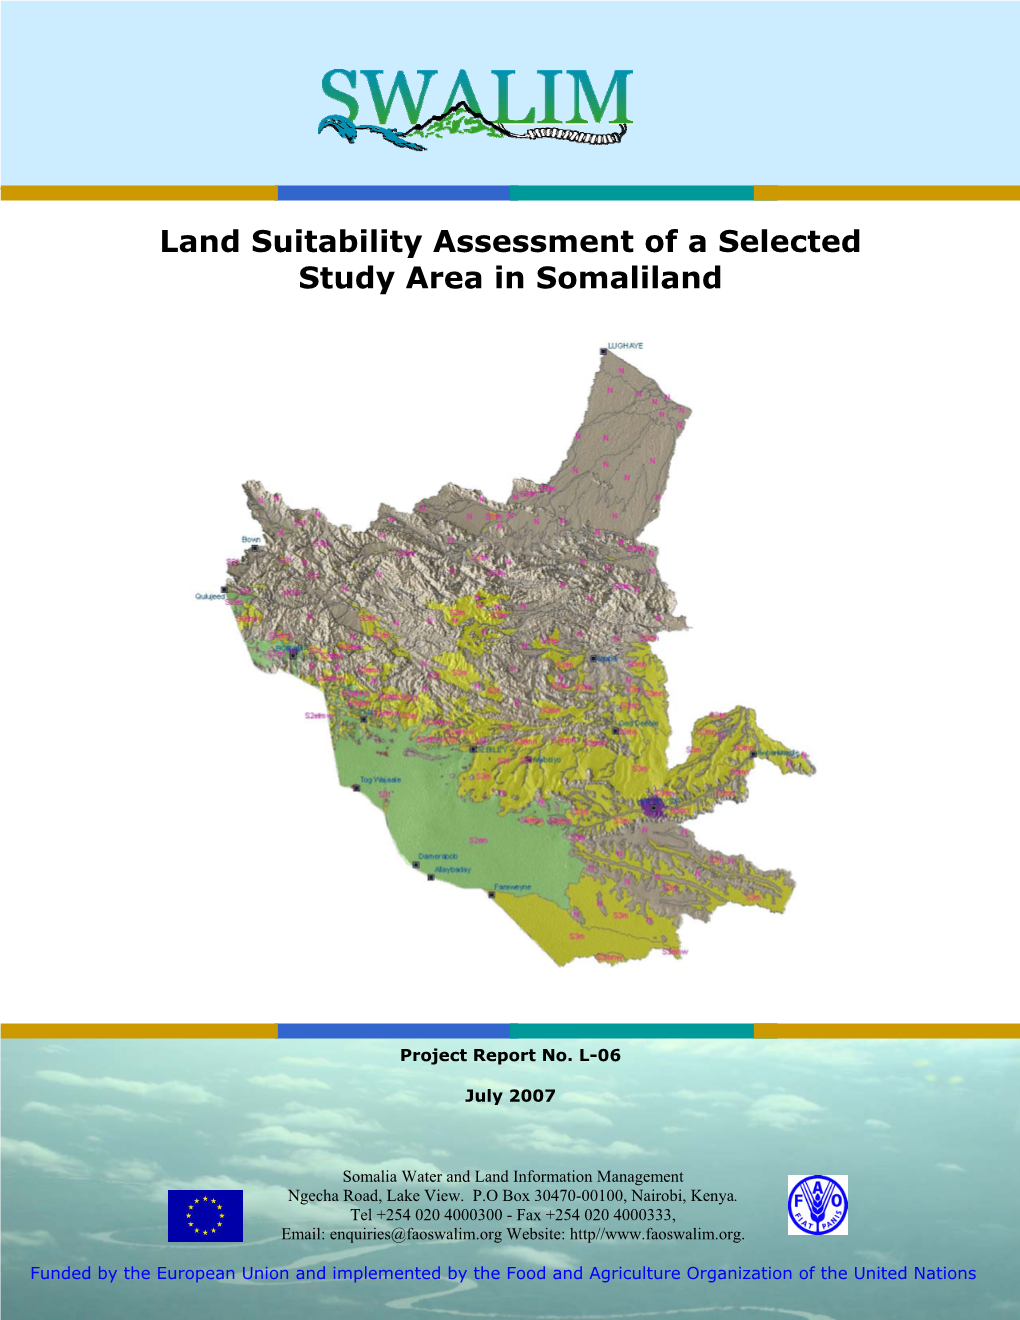 Land Suitability Assessment of a Selected Study Area in Somaliland